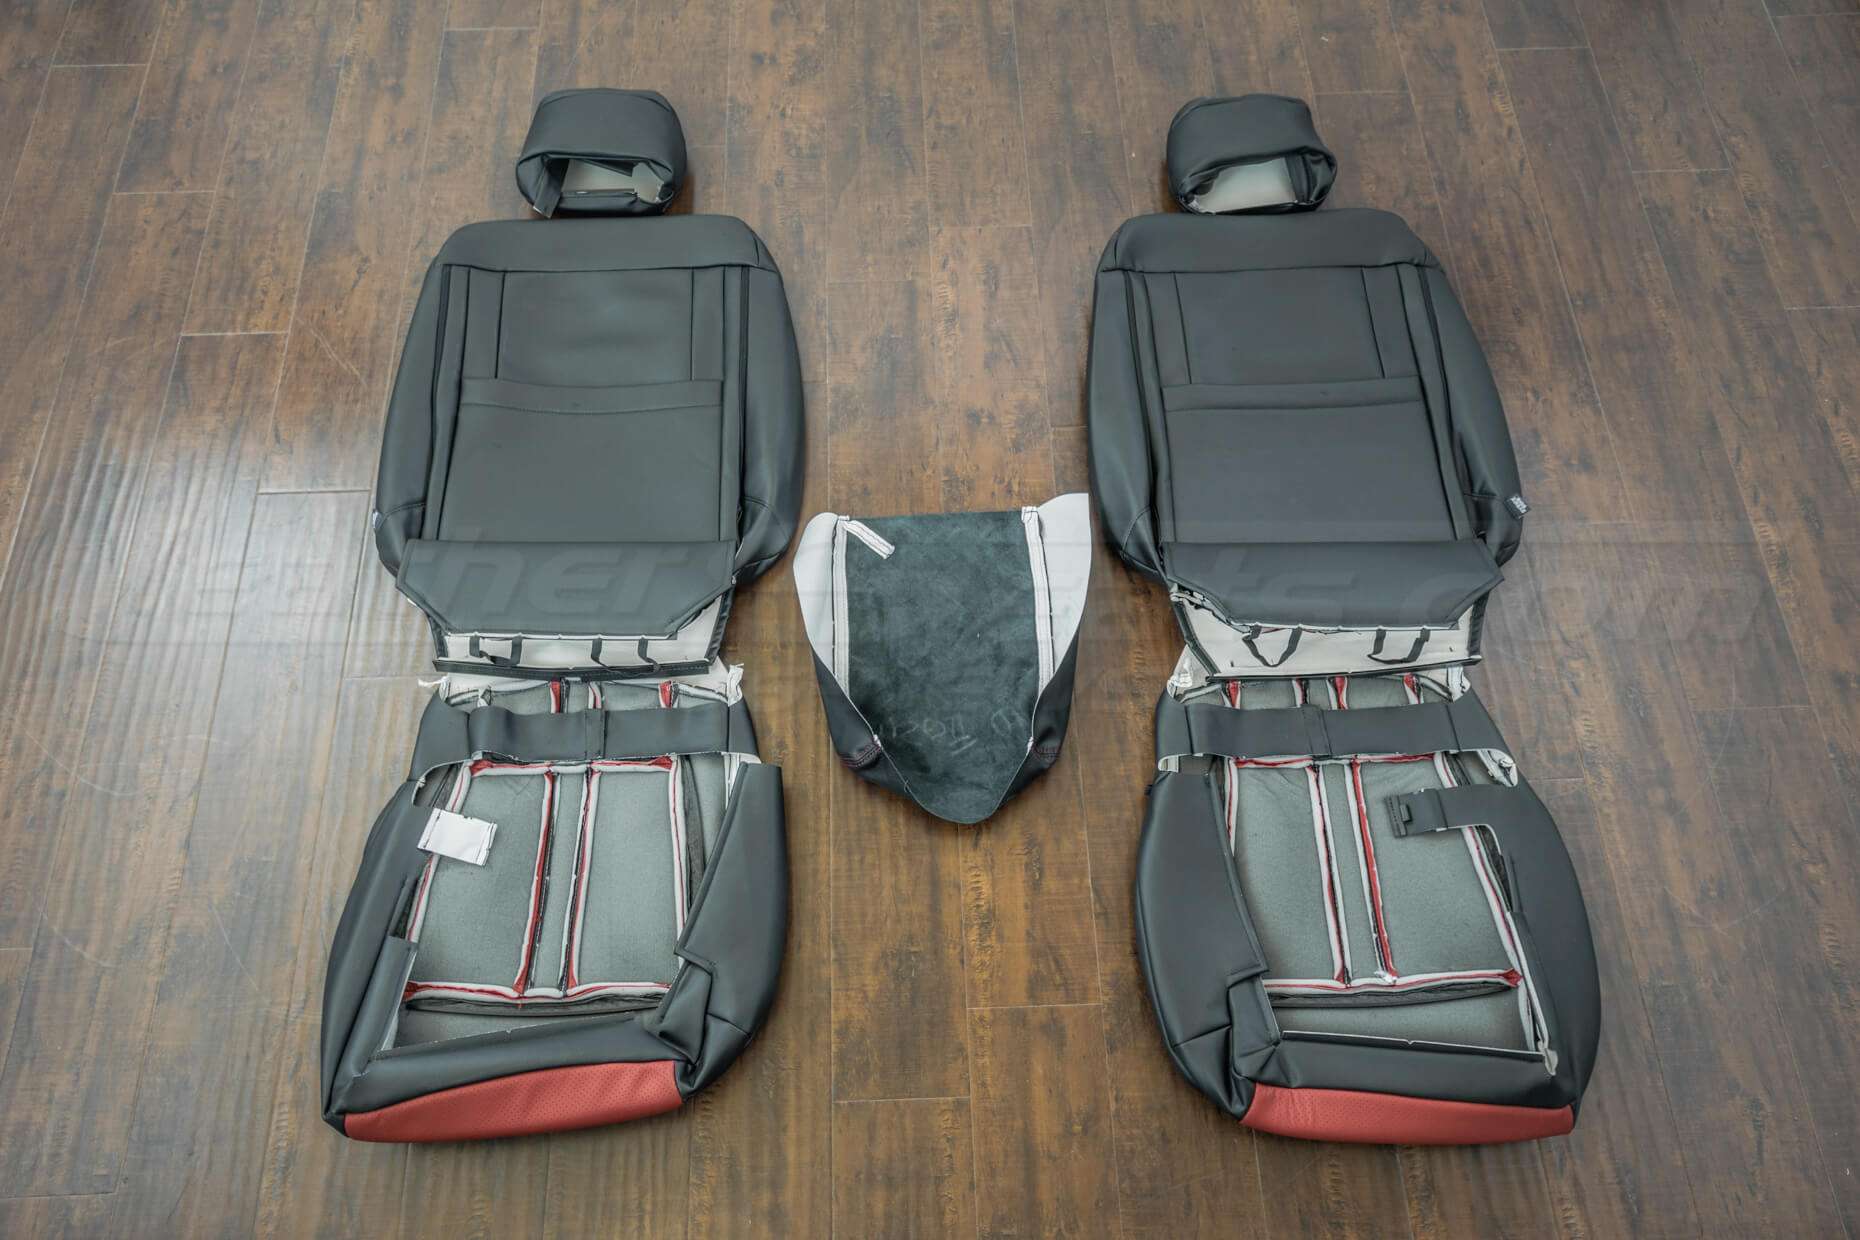 Ford F-150 Upholstery Kit - Black & Red - Back view of front seats with console